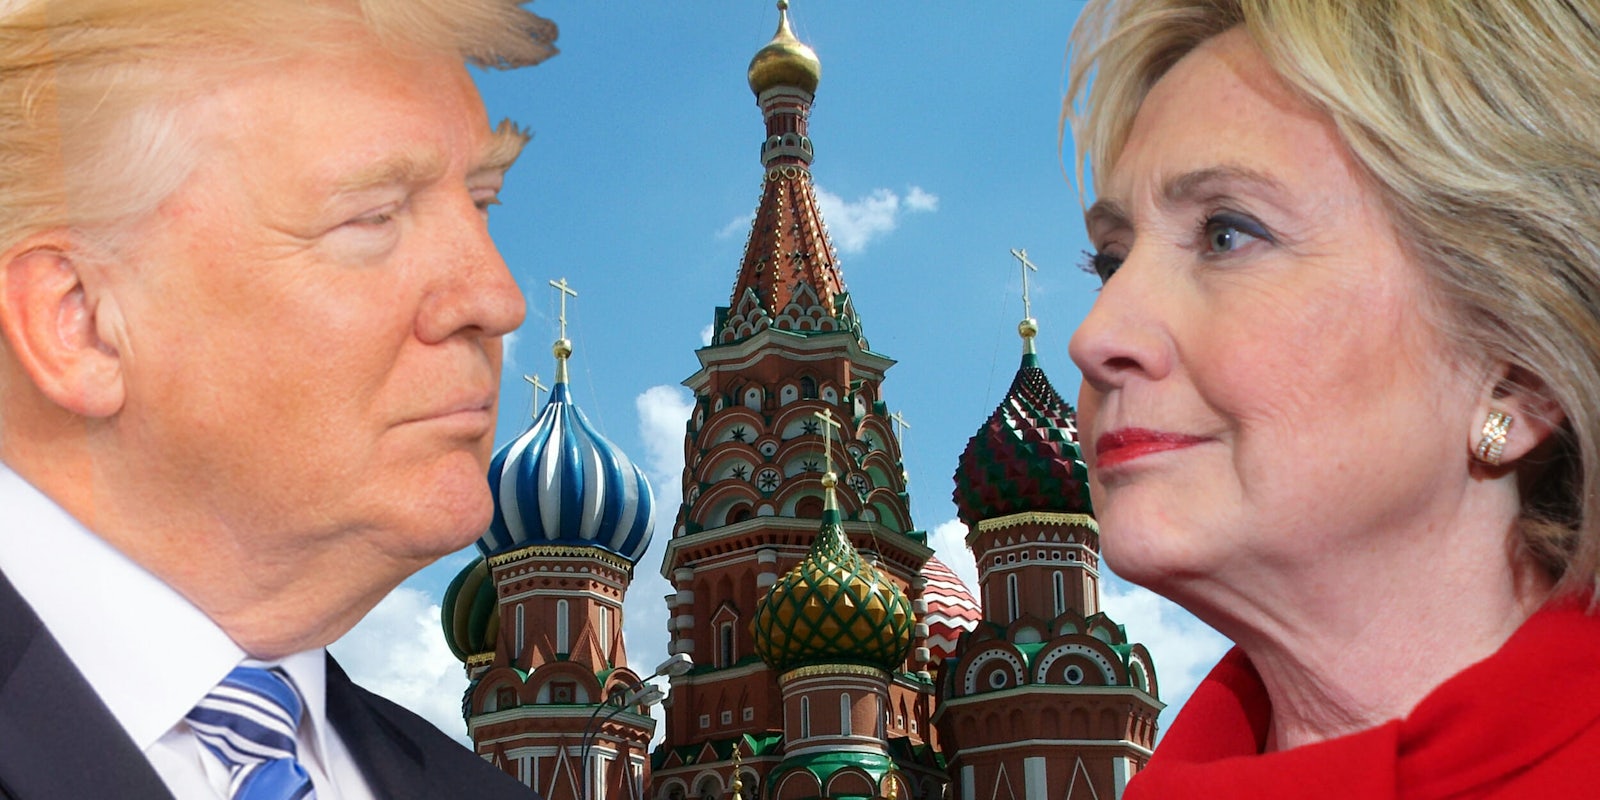 Donald Trump and Hillary Clinton in front of Kremlin buildings